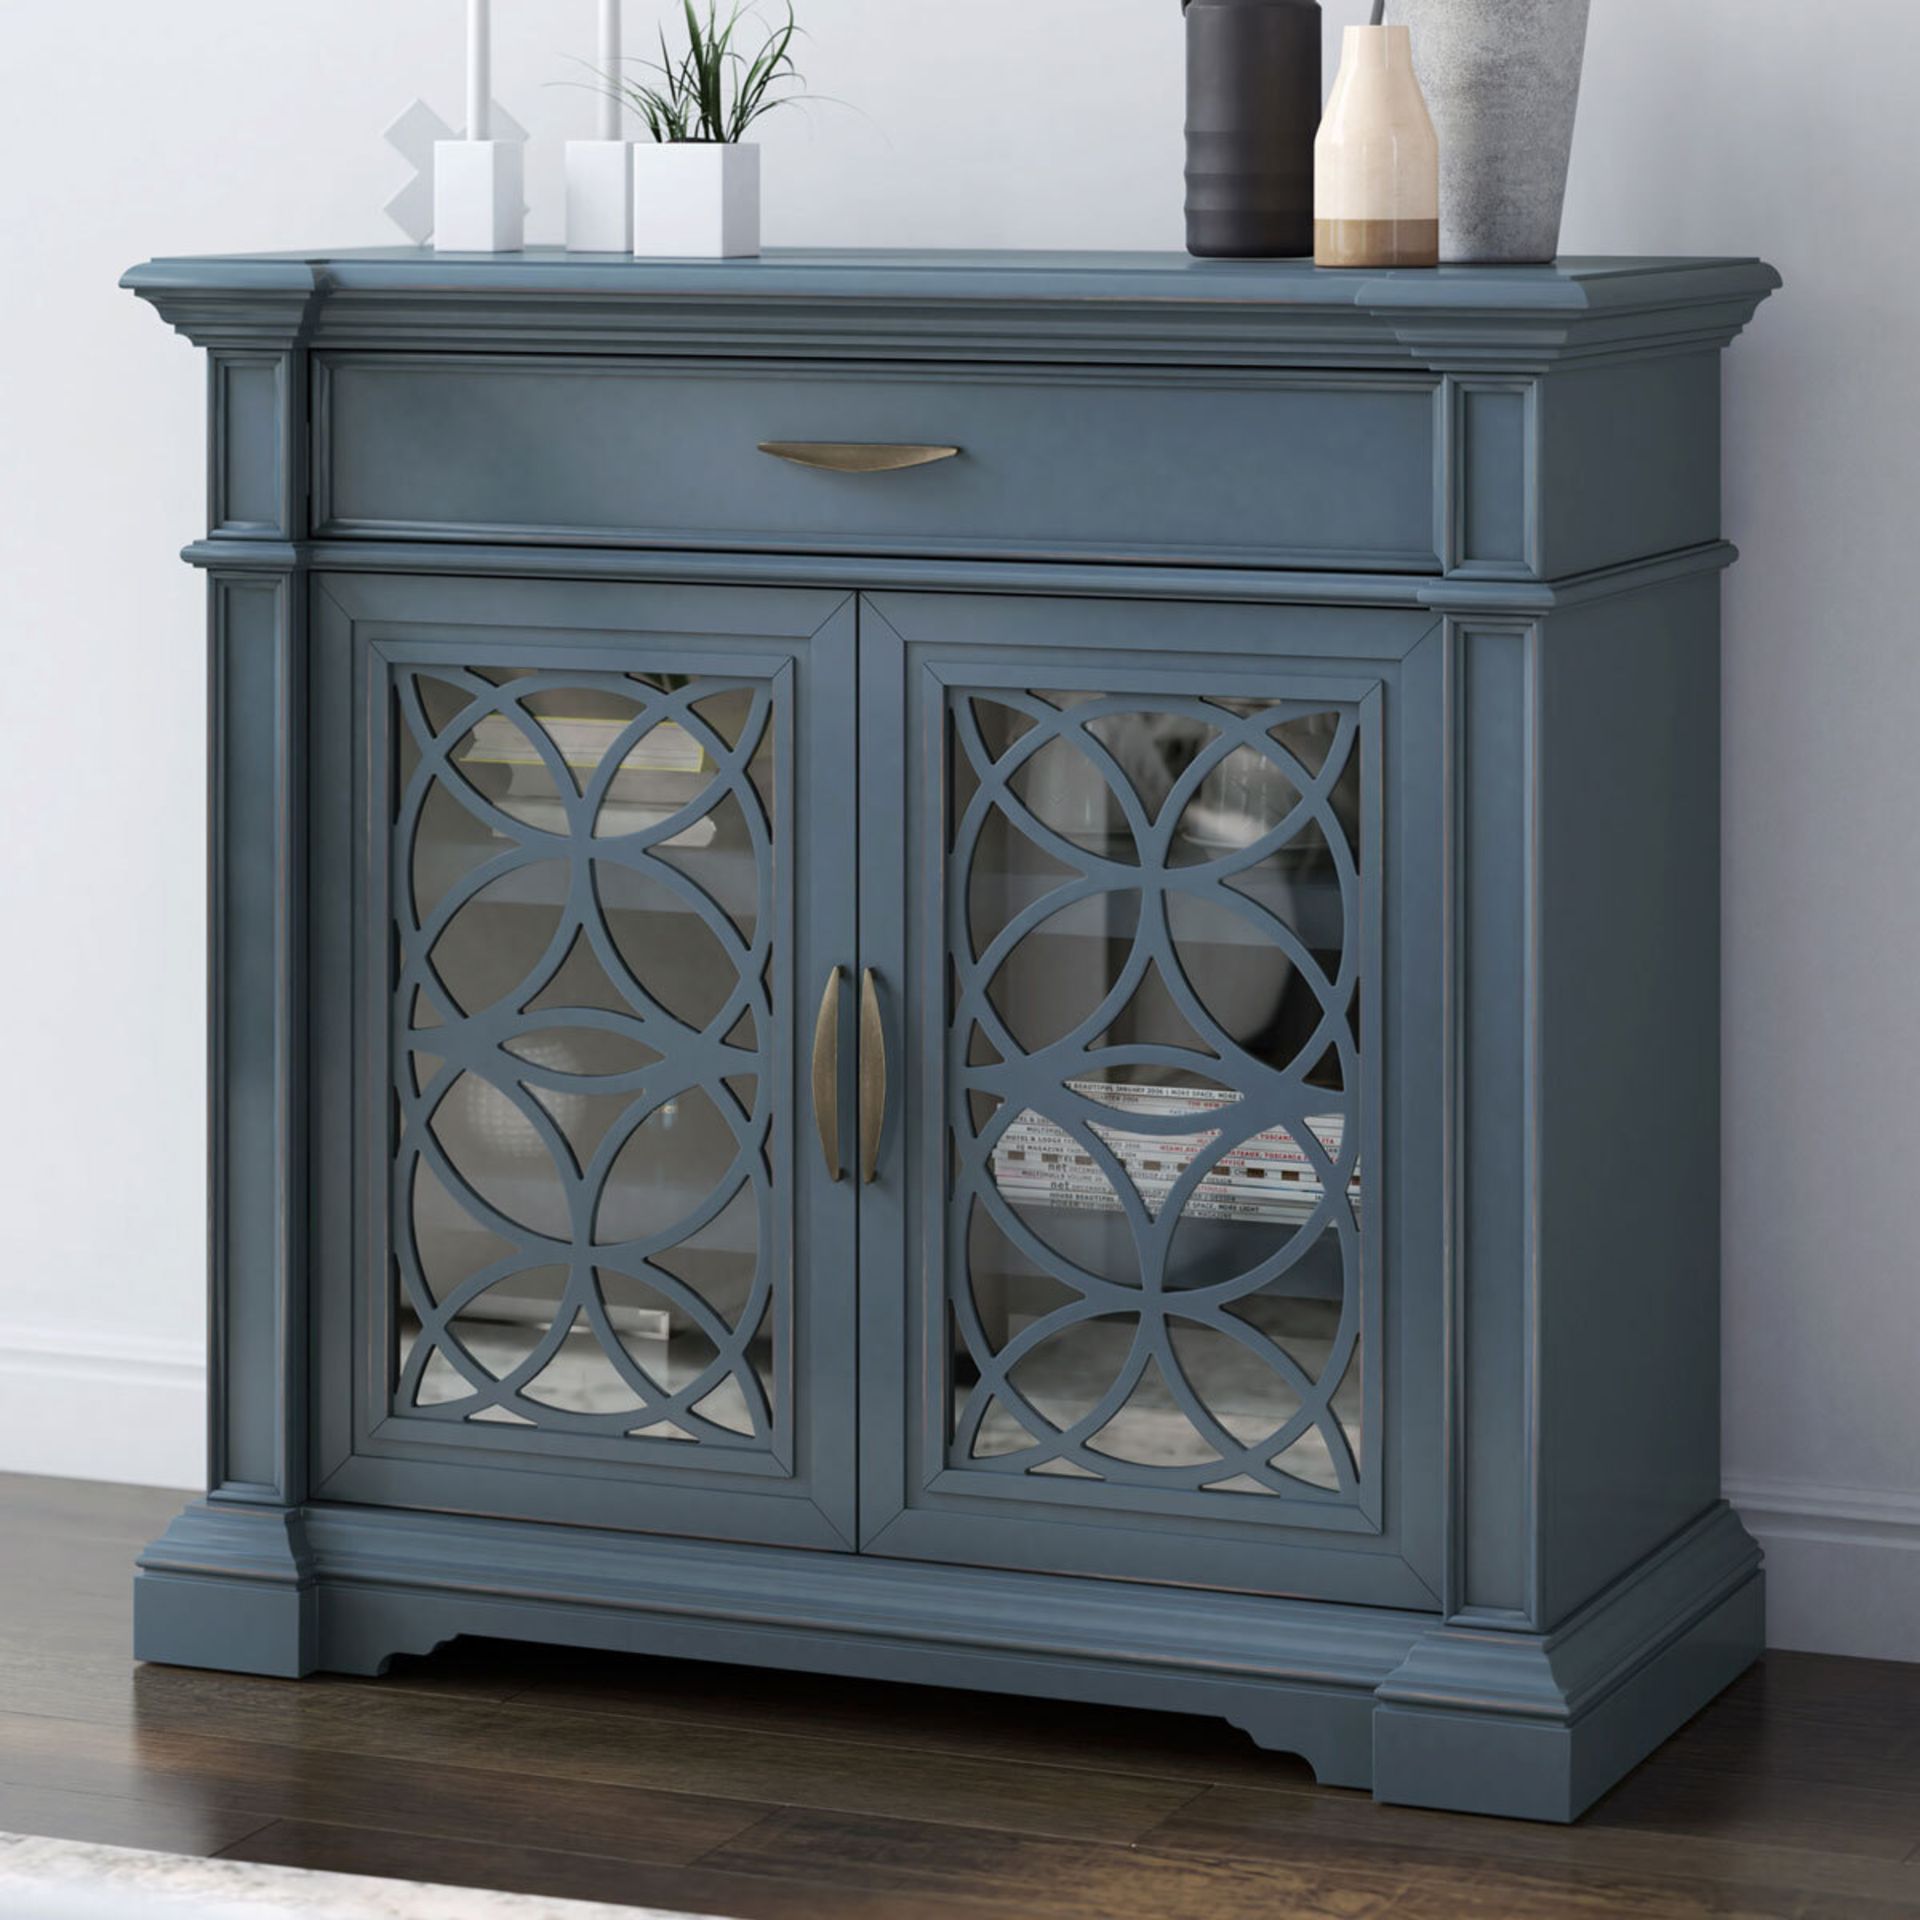 1 BOXED TRESANTI LUNA SMALL BLUE SIDEBOARD RRP Â£449 (PICTURES FOR ILLUSTRATION PURPOSES ONLY)